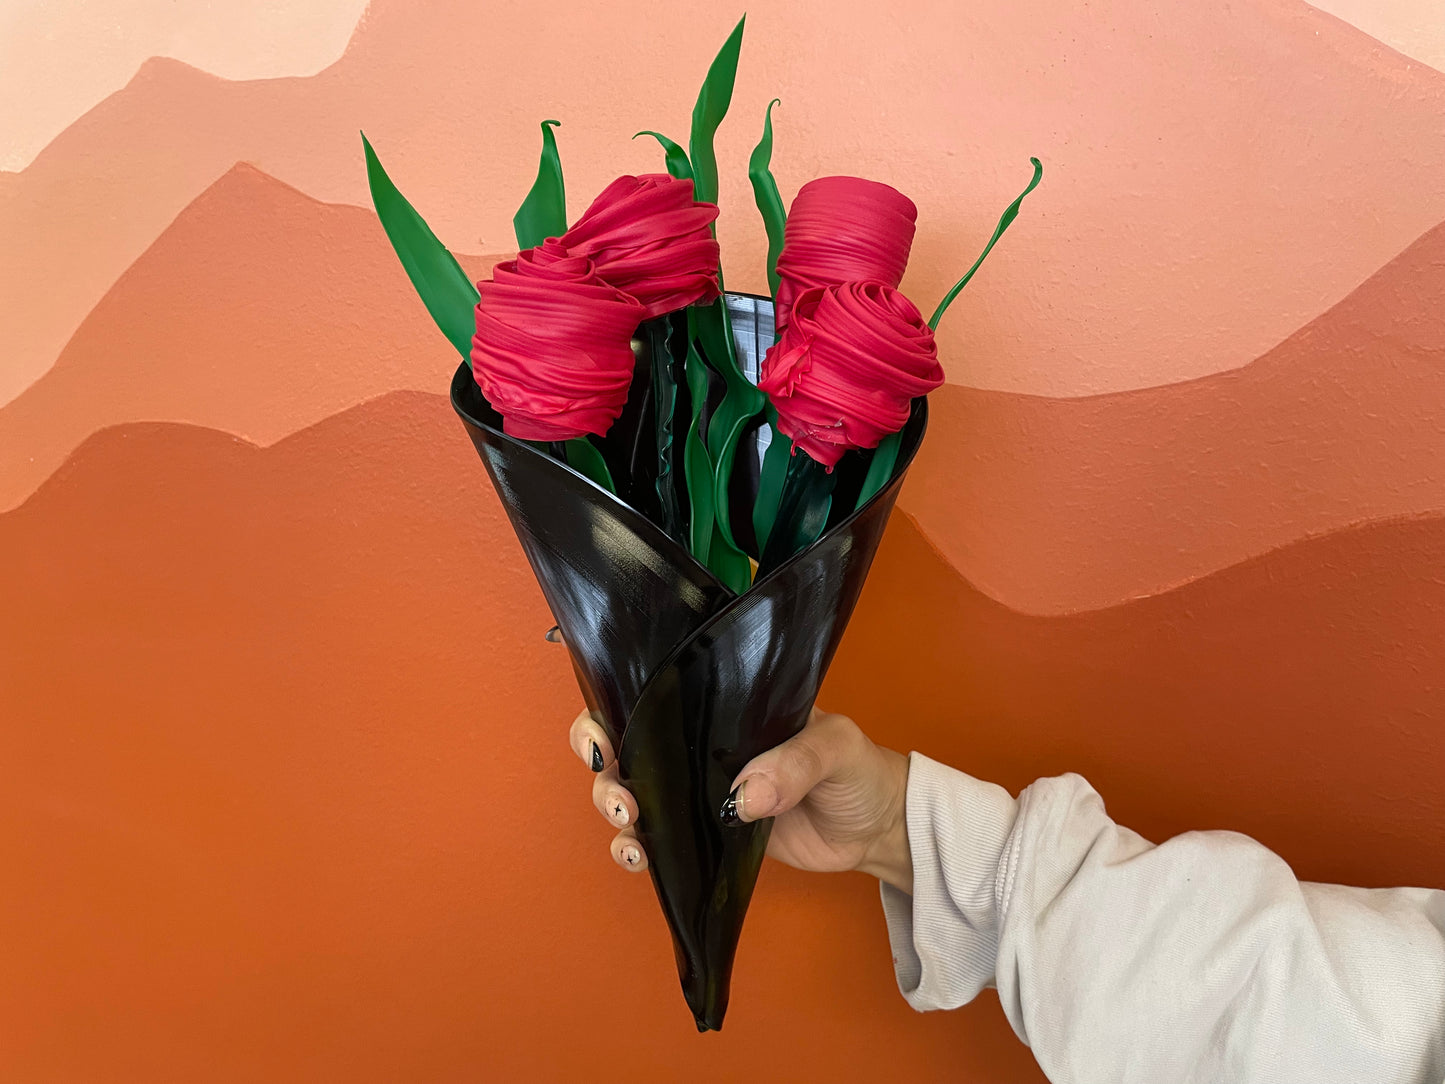 Recycled Vinyl Flower Bouquet - Classic Red Roses